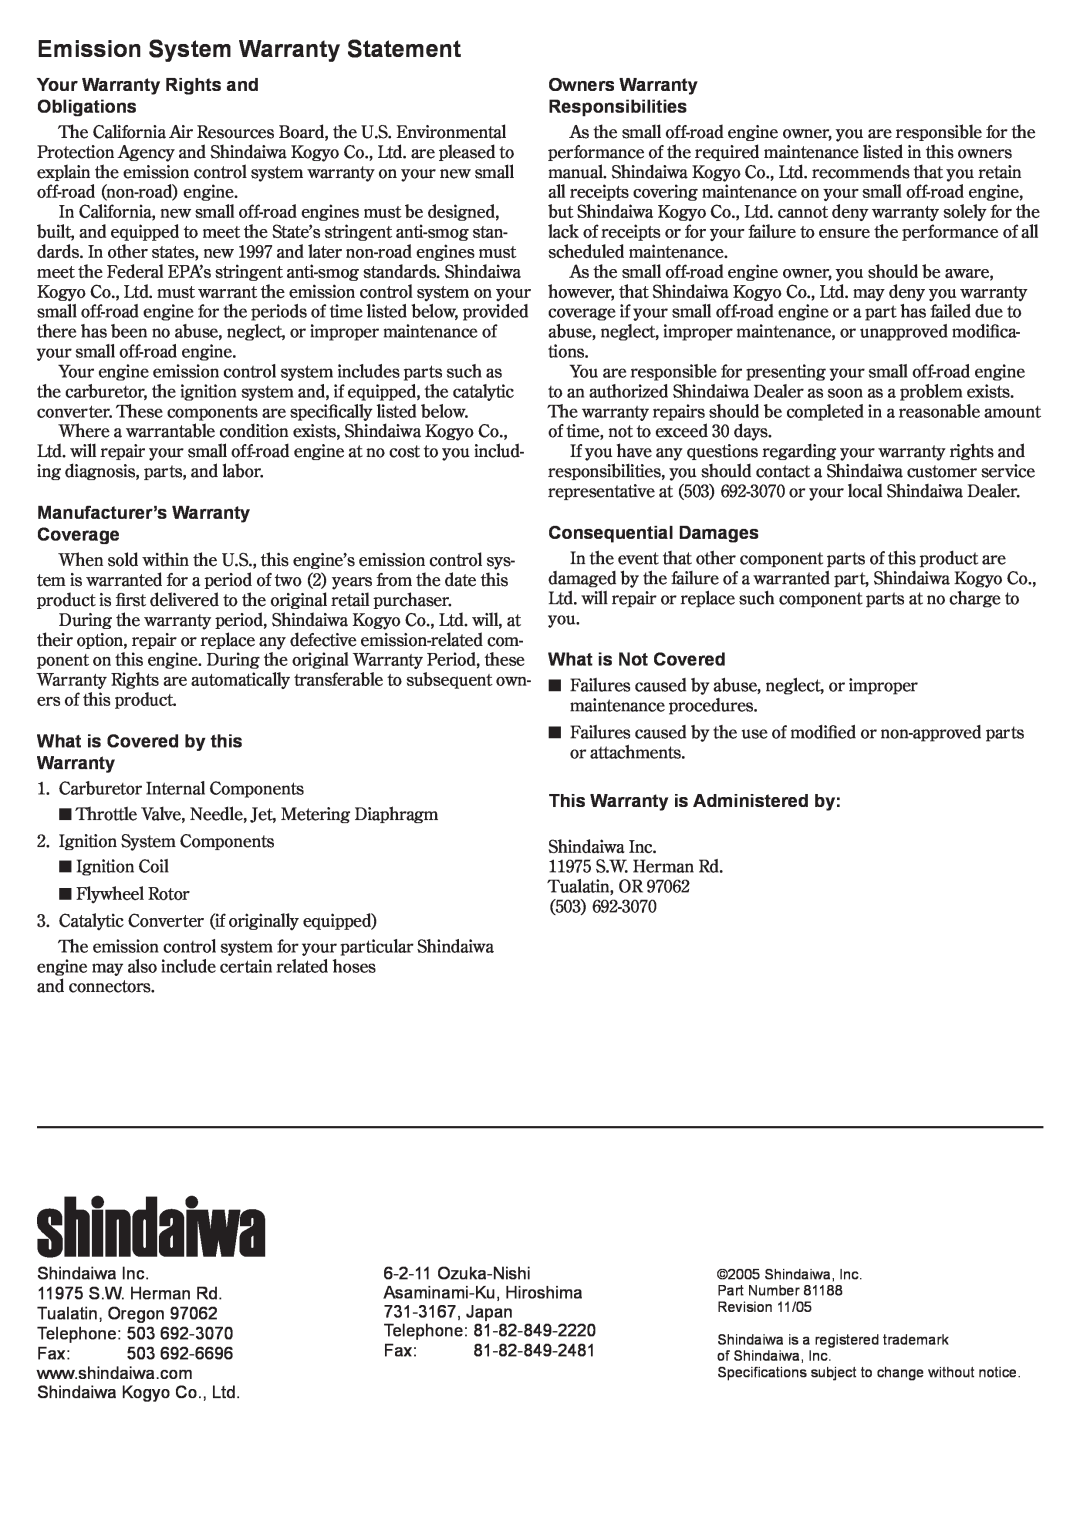 Shindaiwa C3410 Emission System Warranty Statement, Your Warranty Rights and Obligations, Manufacturer’s Warranty Coverage 